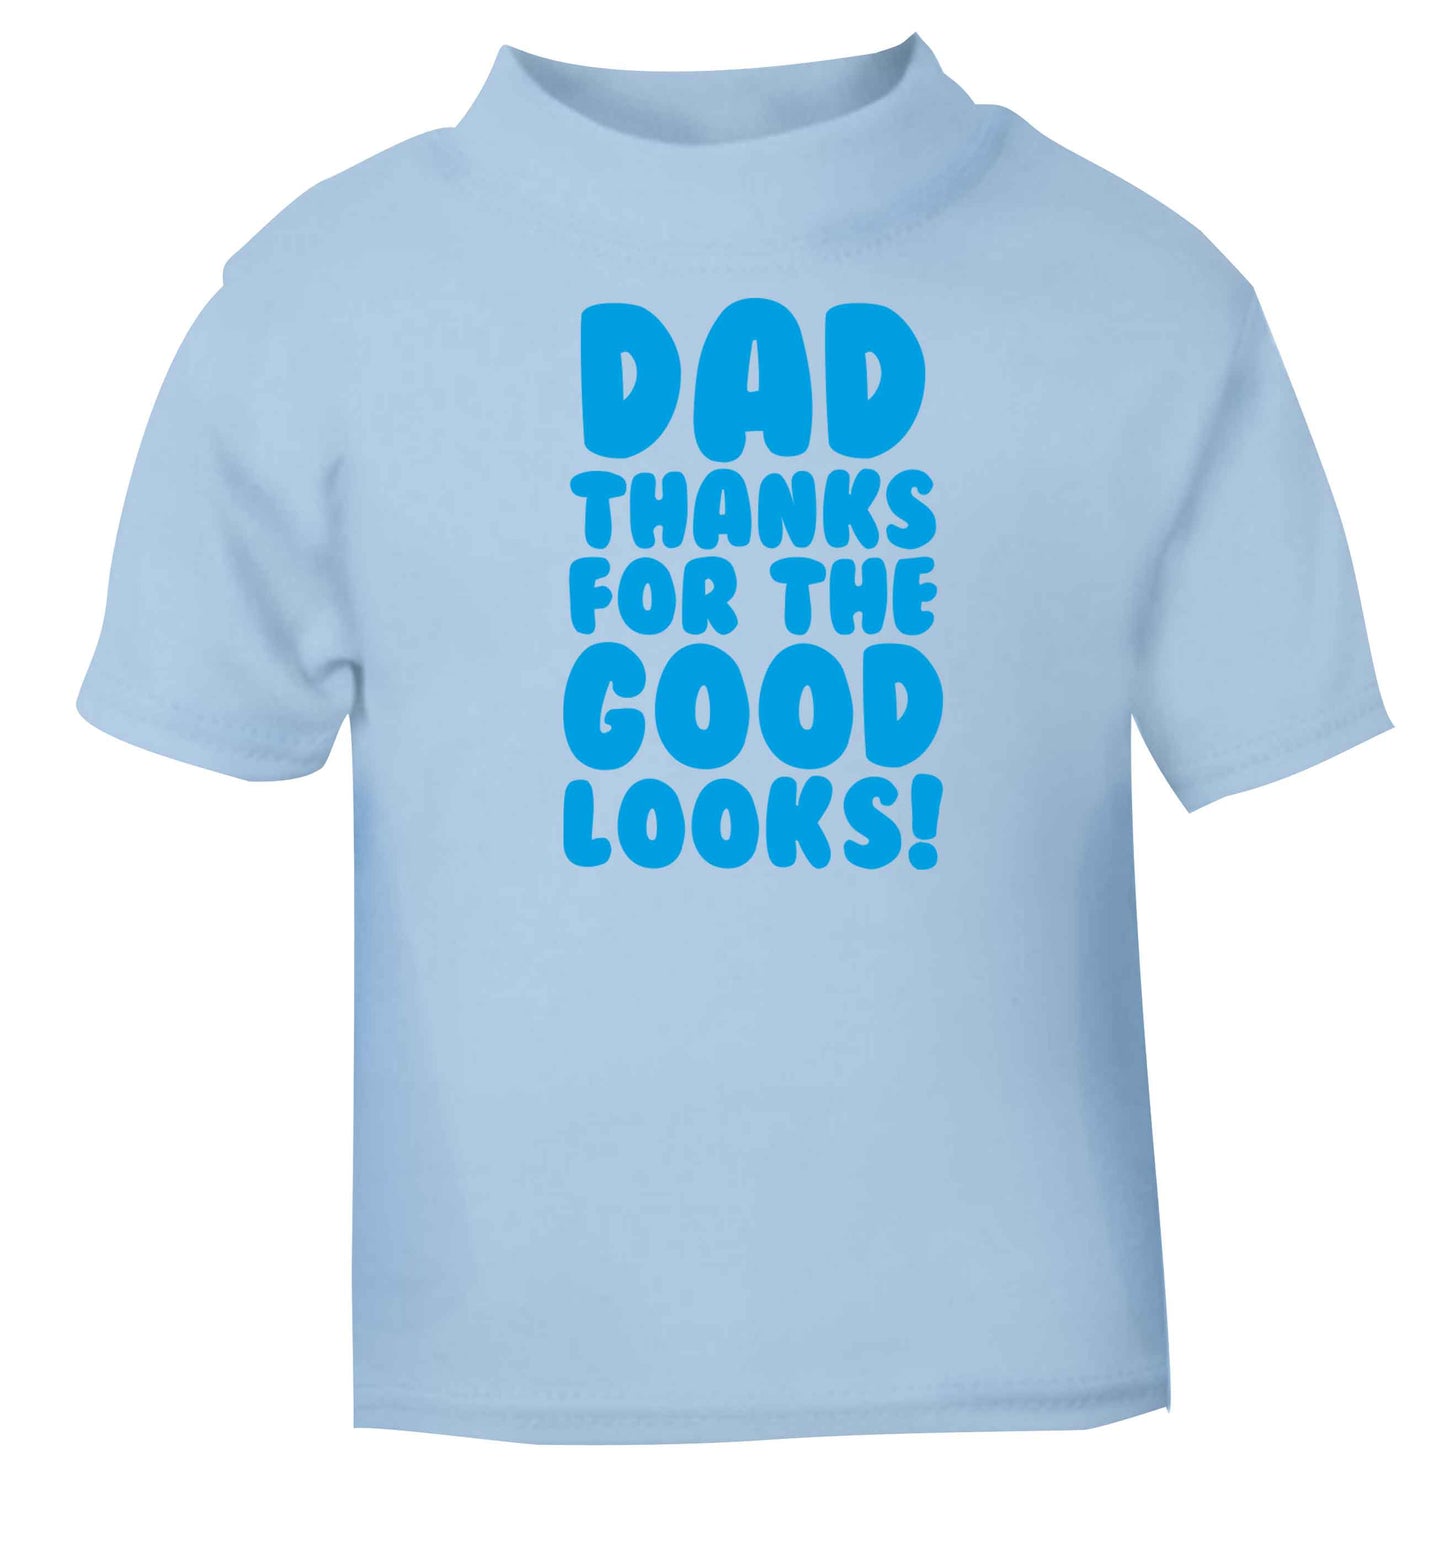 Dad thanks for the good looks light blue baby toddler Tshirt 2 Years